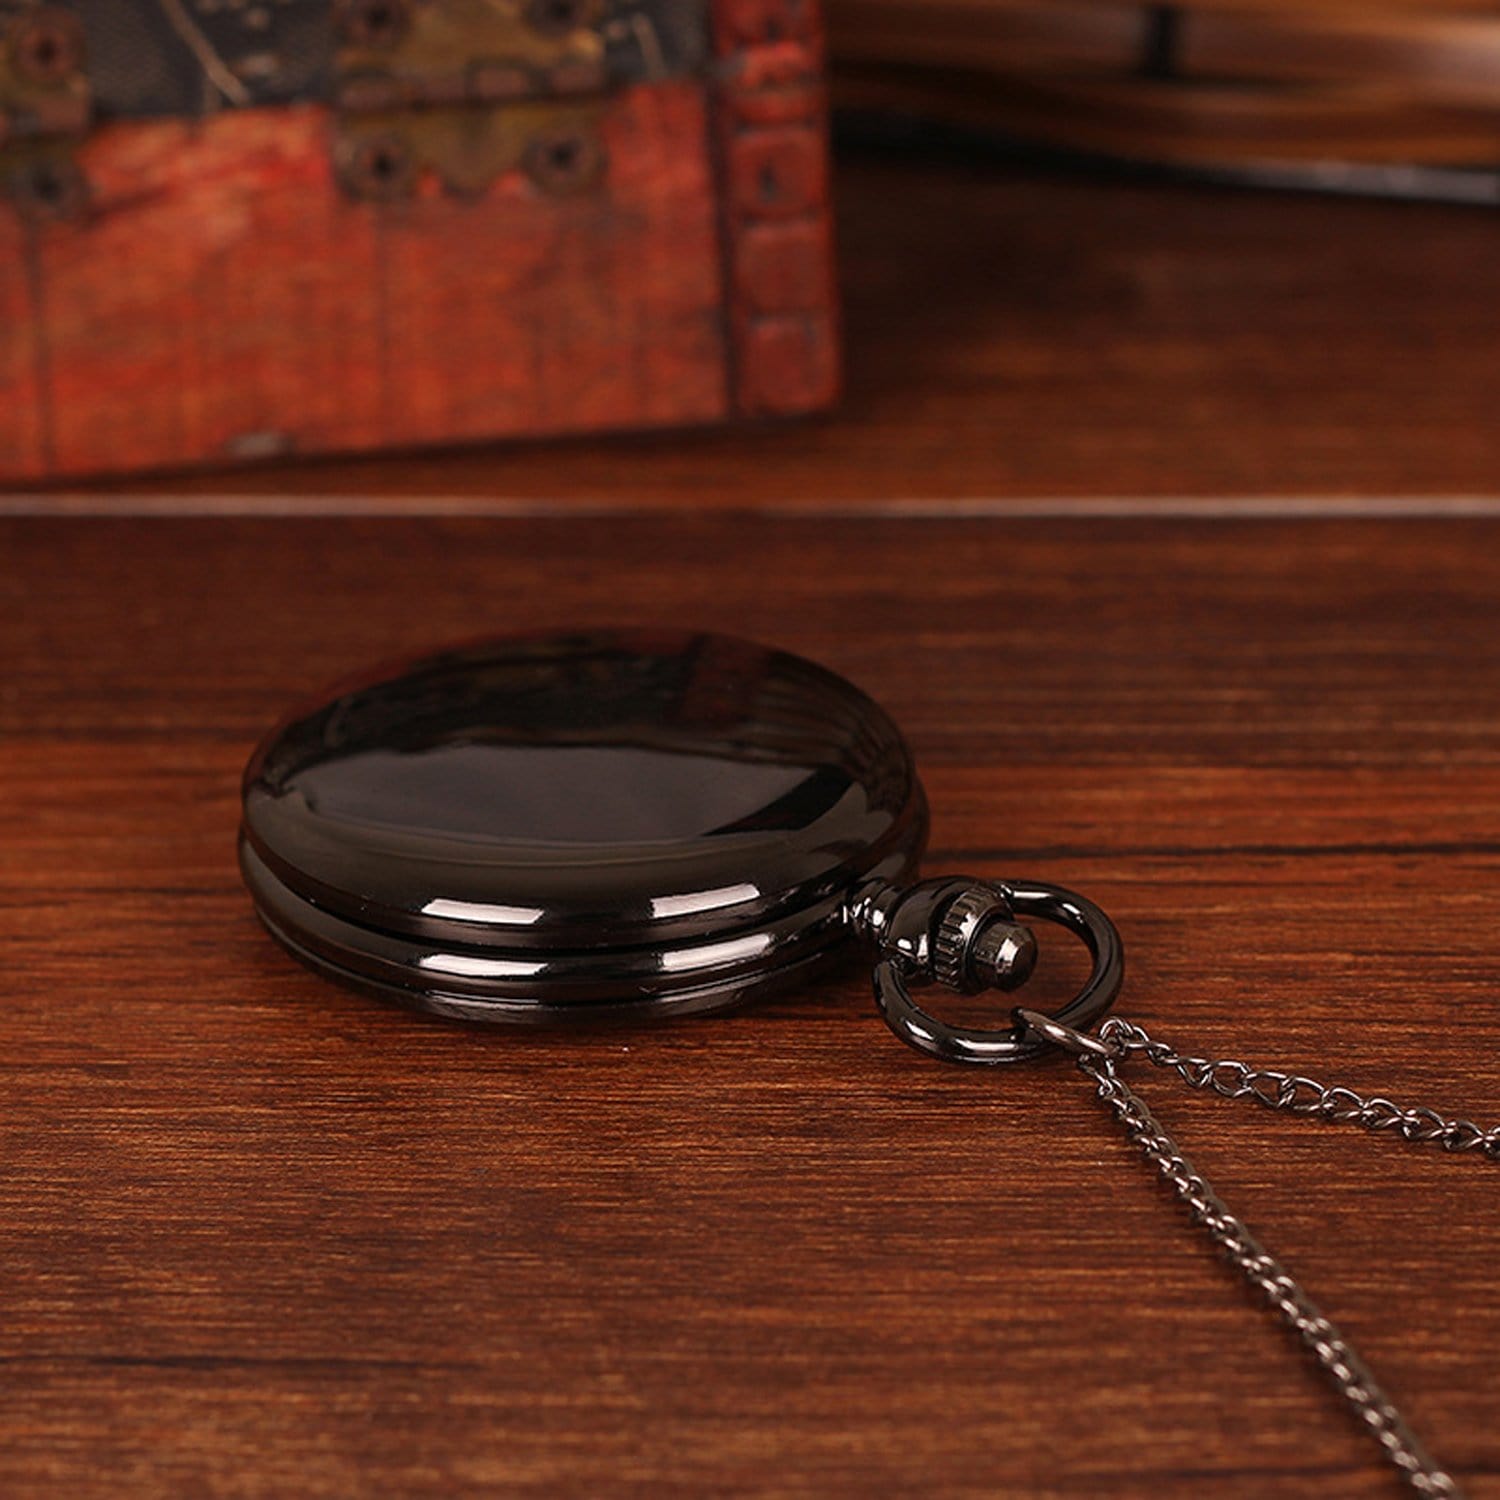 Pocket Watches To Our Son - Go Forth And Aim For The Skies Pocket Watch GiveMe-Gifts